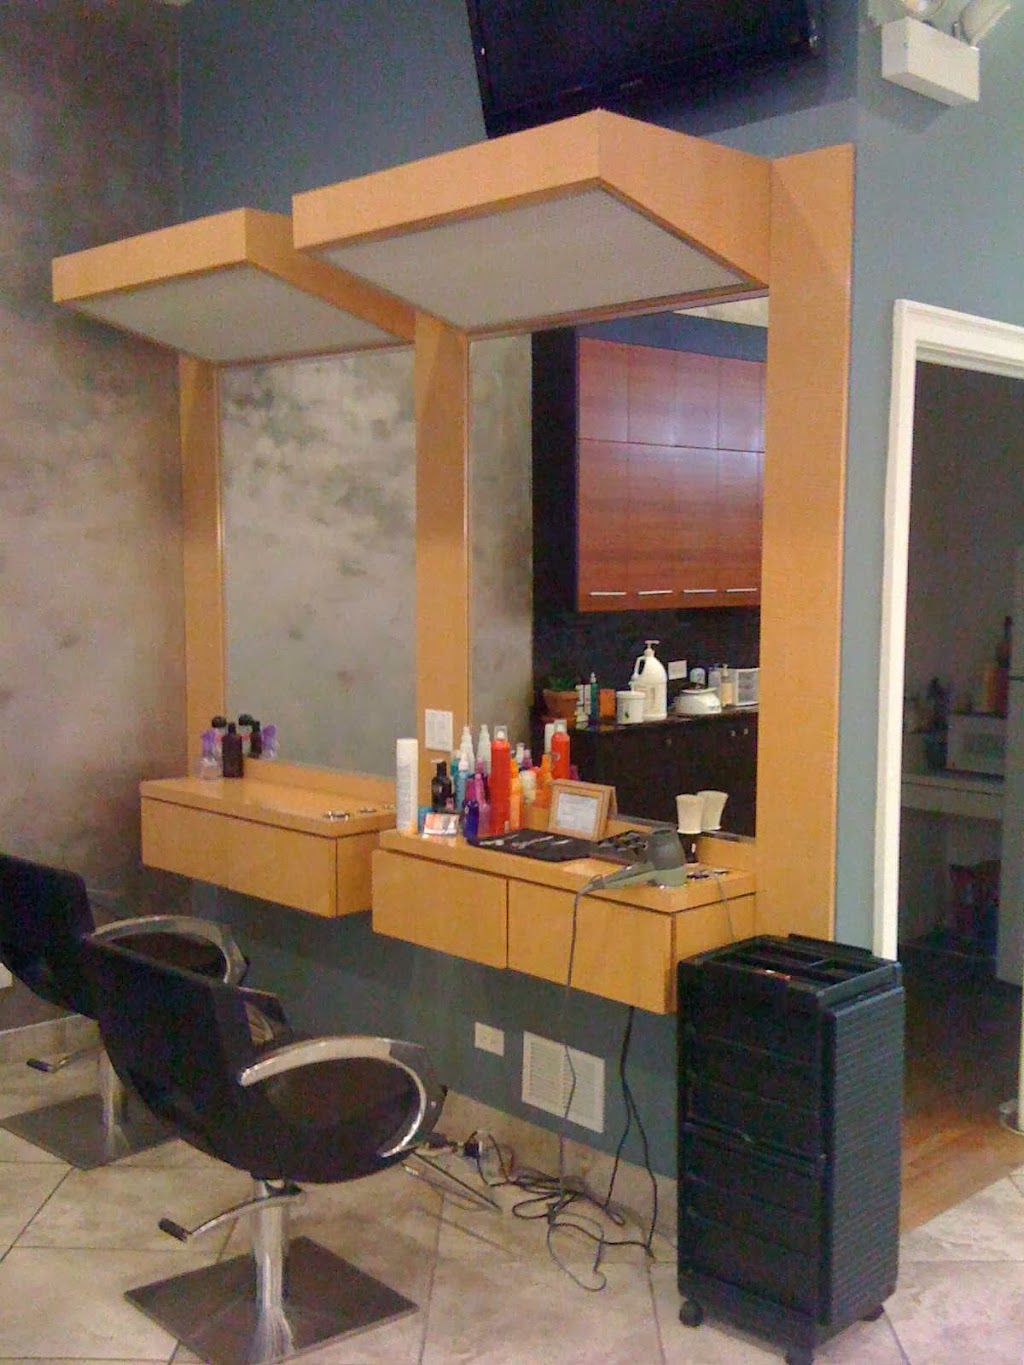 INSTYLE HAIR STUDIO & DAY SPA | 5136 W Irving Park Rd, Chicago, IL 60641 | Phone: (773) 282-5323